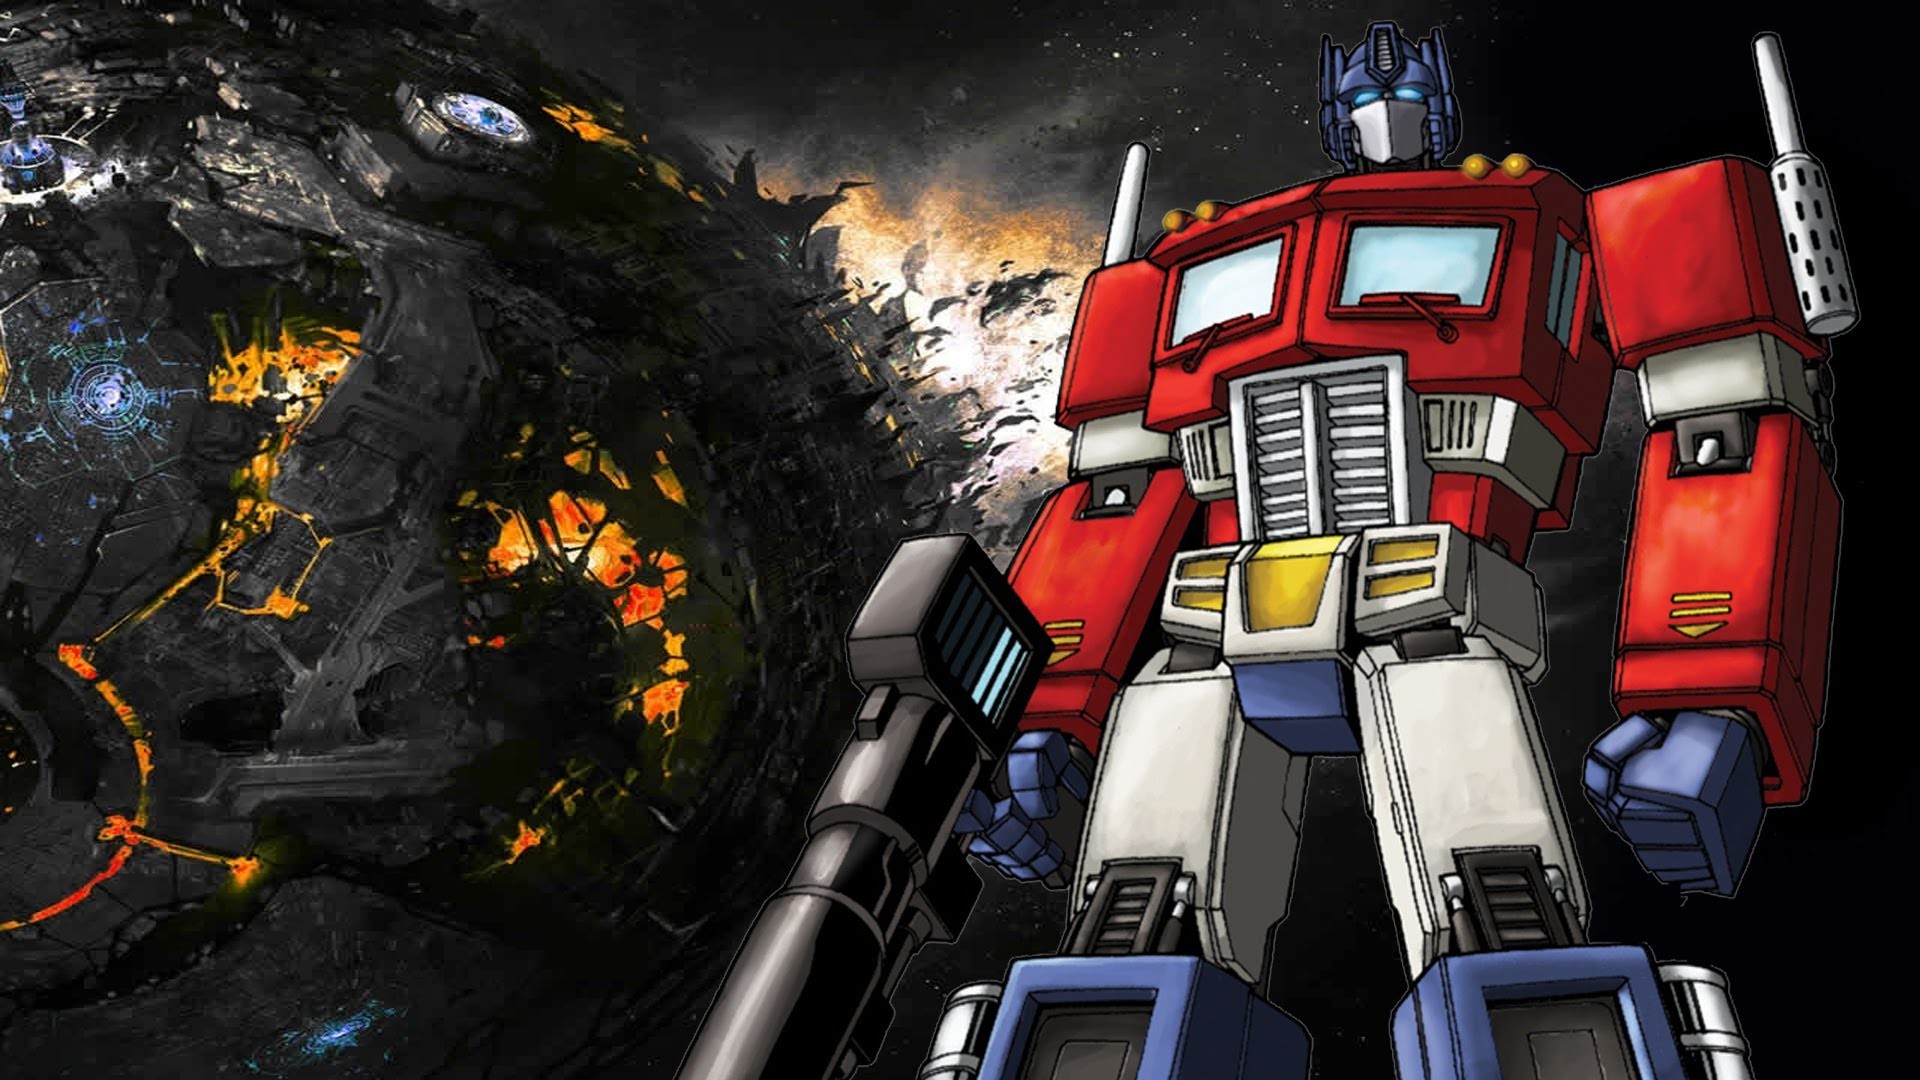 1920x1080 Displaying 17> Images For - Optimus Prime G1 Wallpaper Hd..